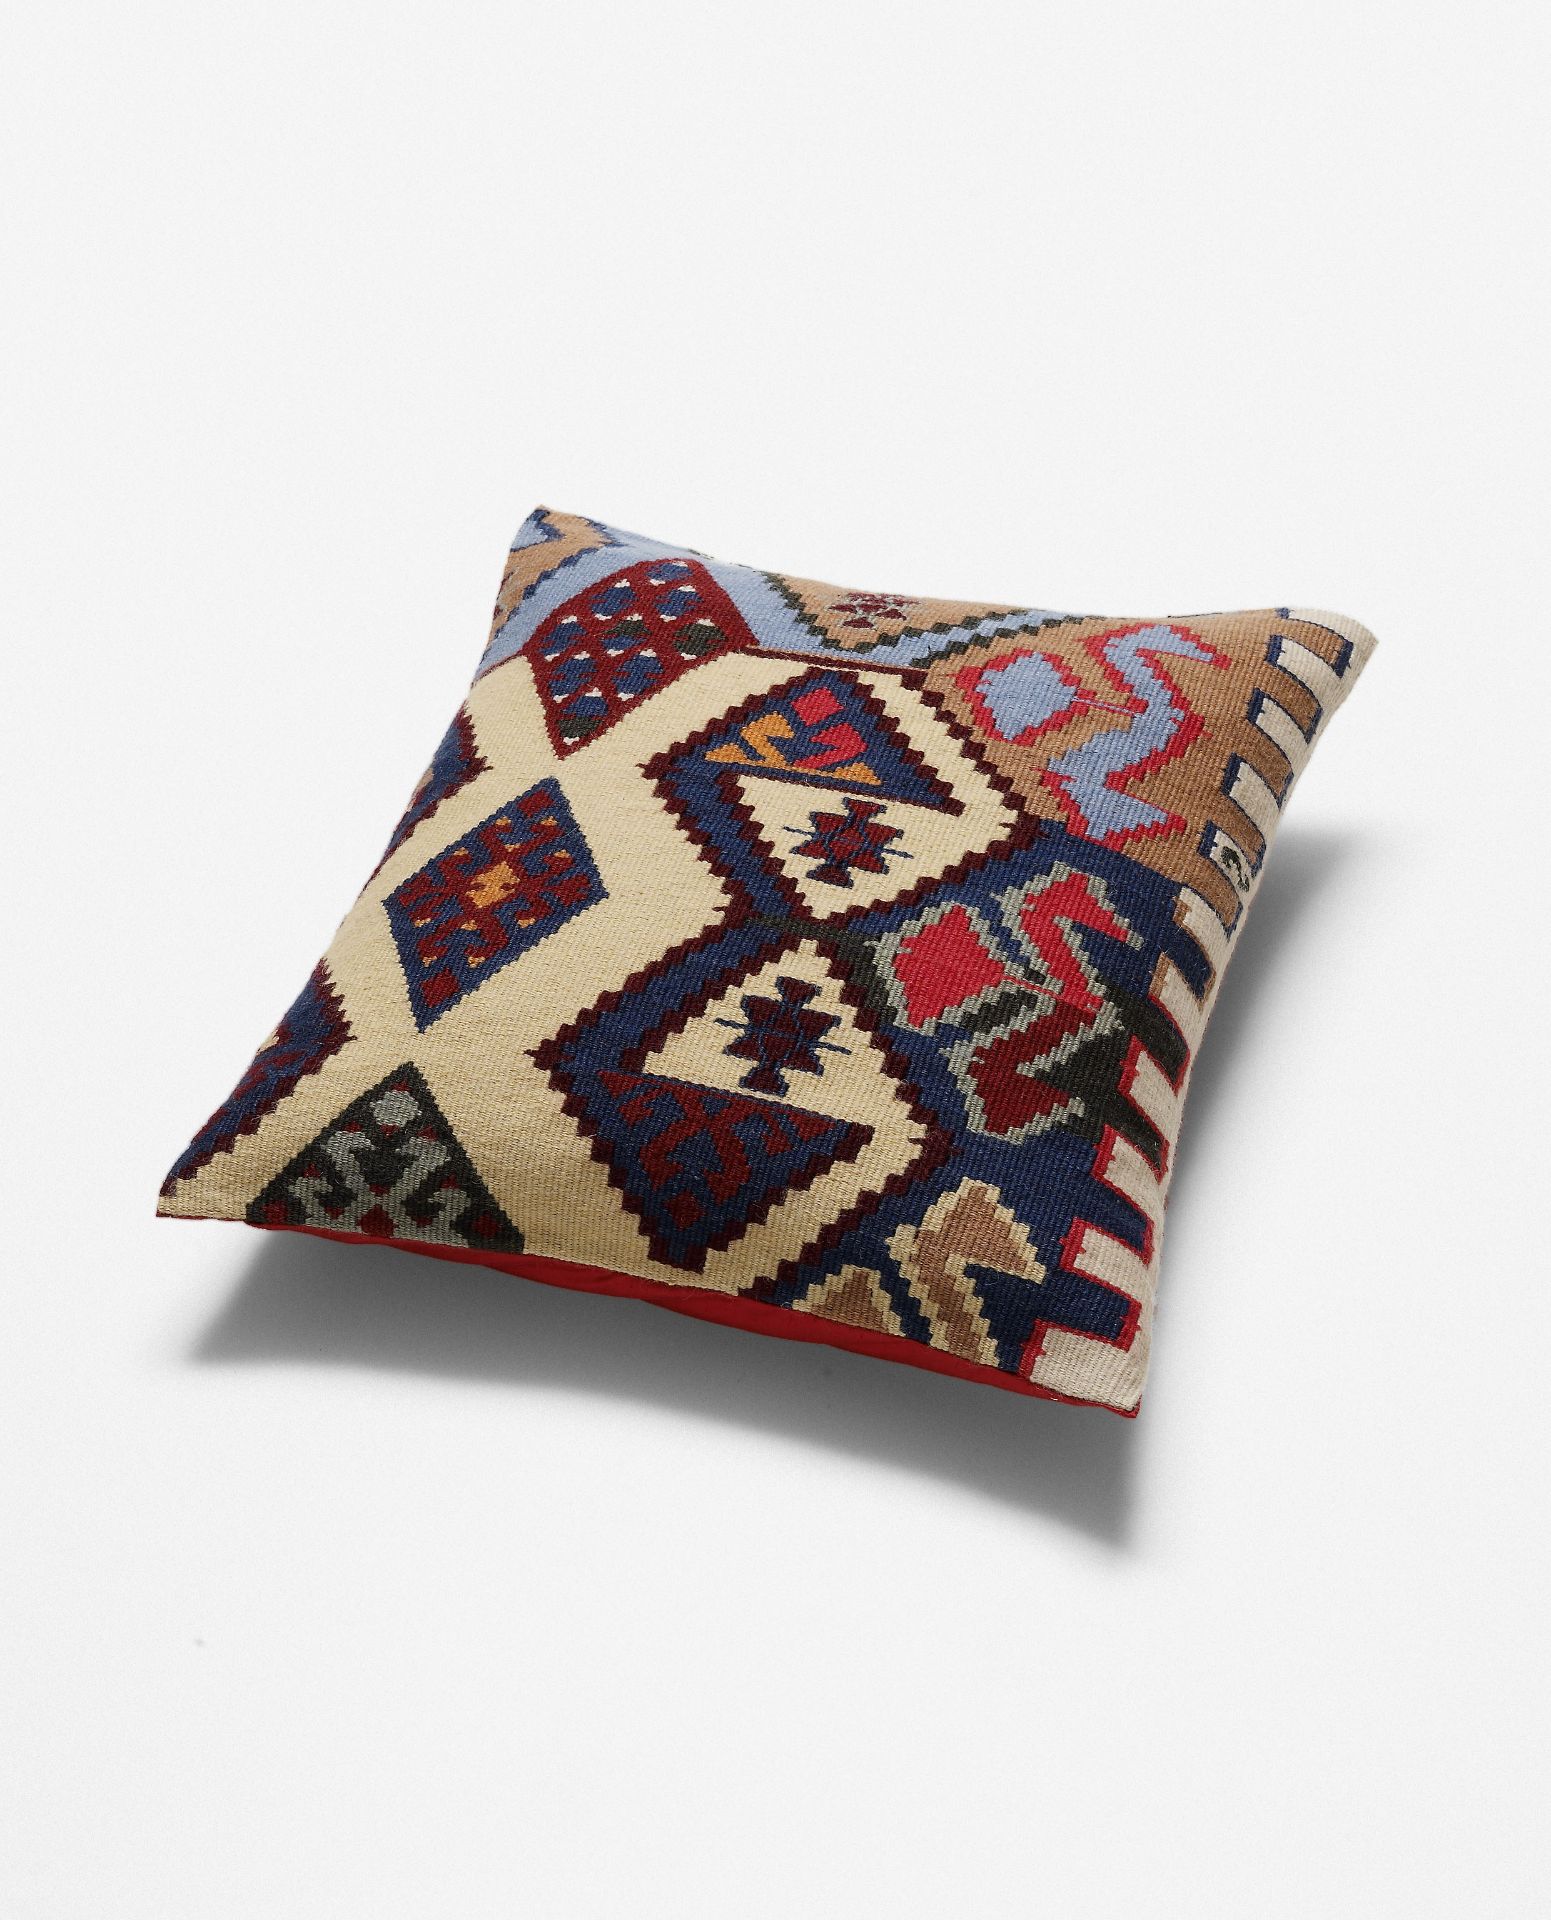 Olaf Nicolai: Georg's Pillow (Replica of a pillow from George Lukács sofa in his study at Belgrad Ka